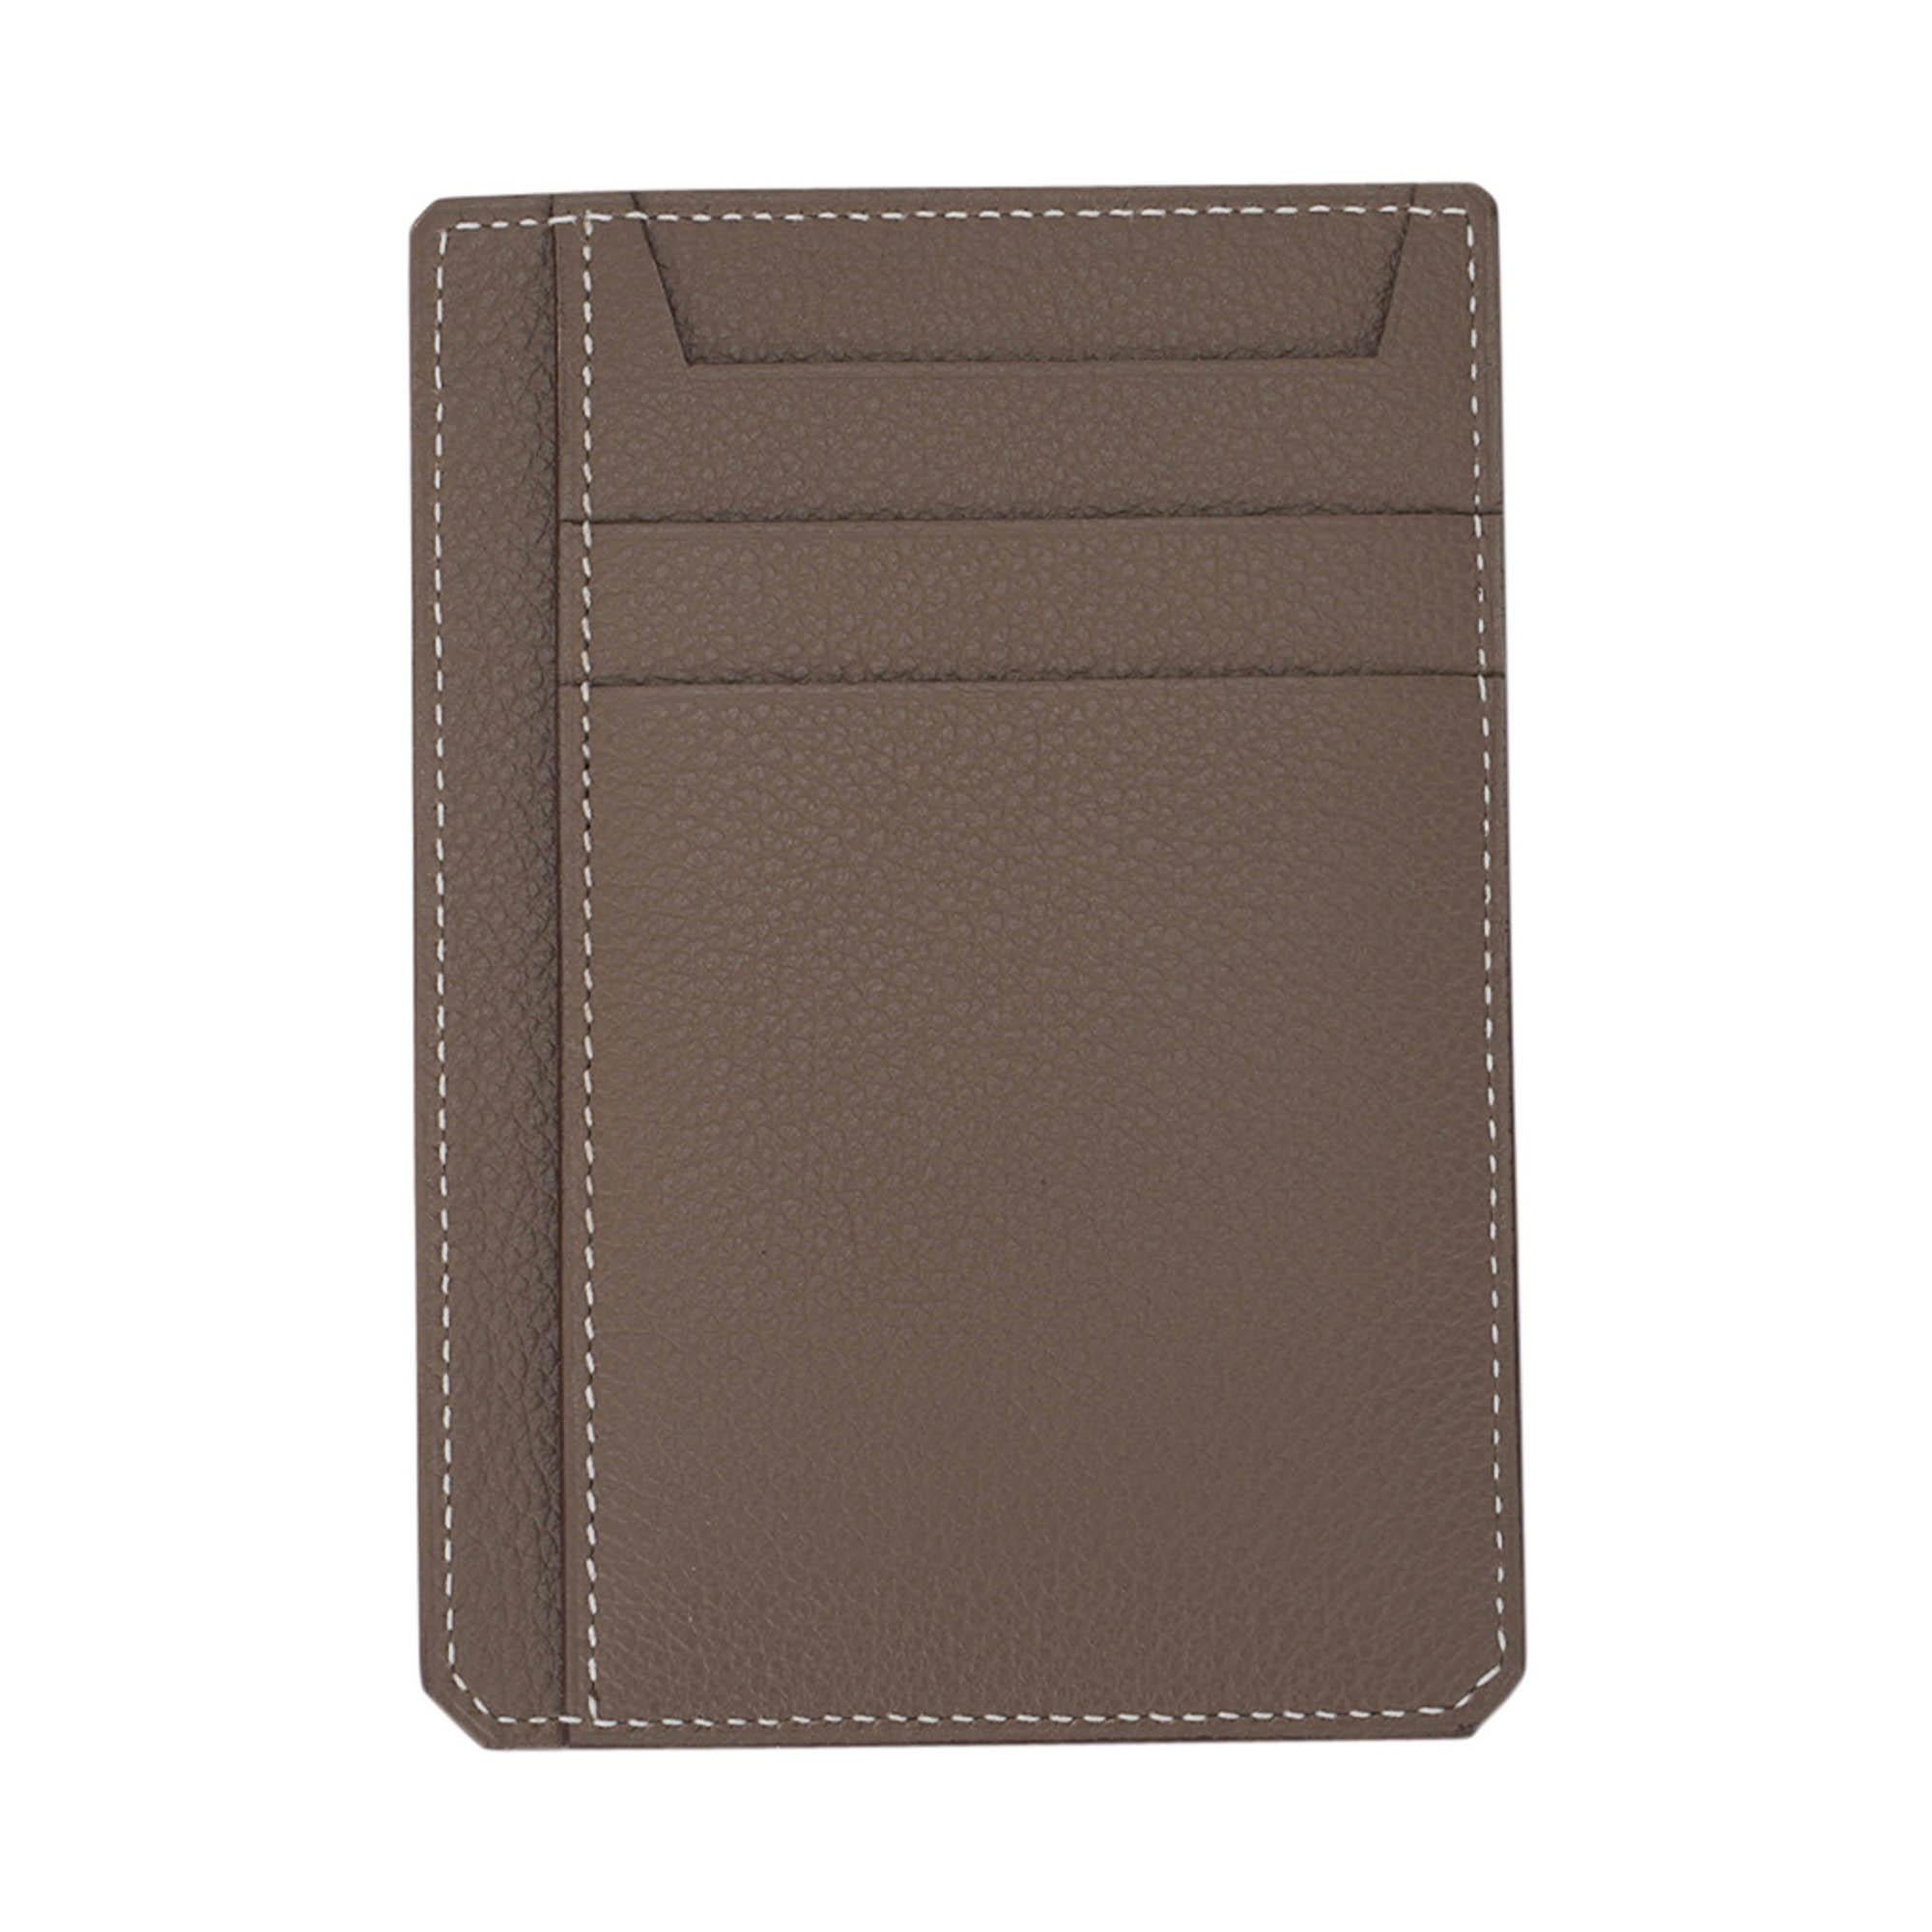 Mightychic offers an Hermes 8CC Card Holder featured in Etoupe with White Topstitch.
As part of the City line of cardholders, it is compact and lightweight.
There are 8 slots for business and or credit cards inside.
Neutral and beautiful in